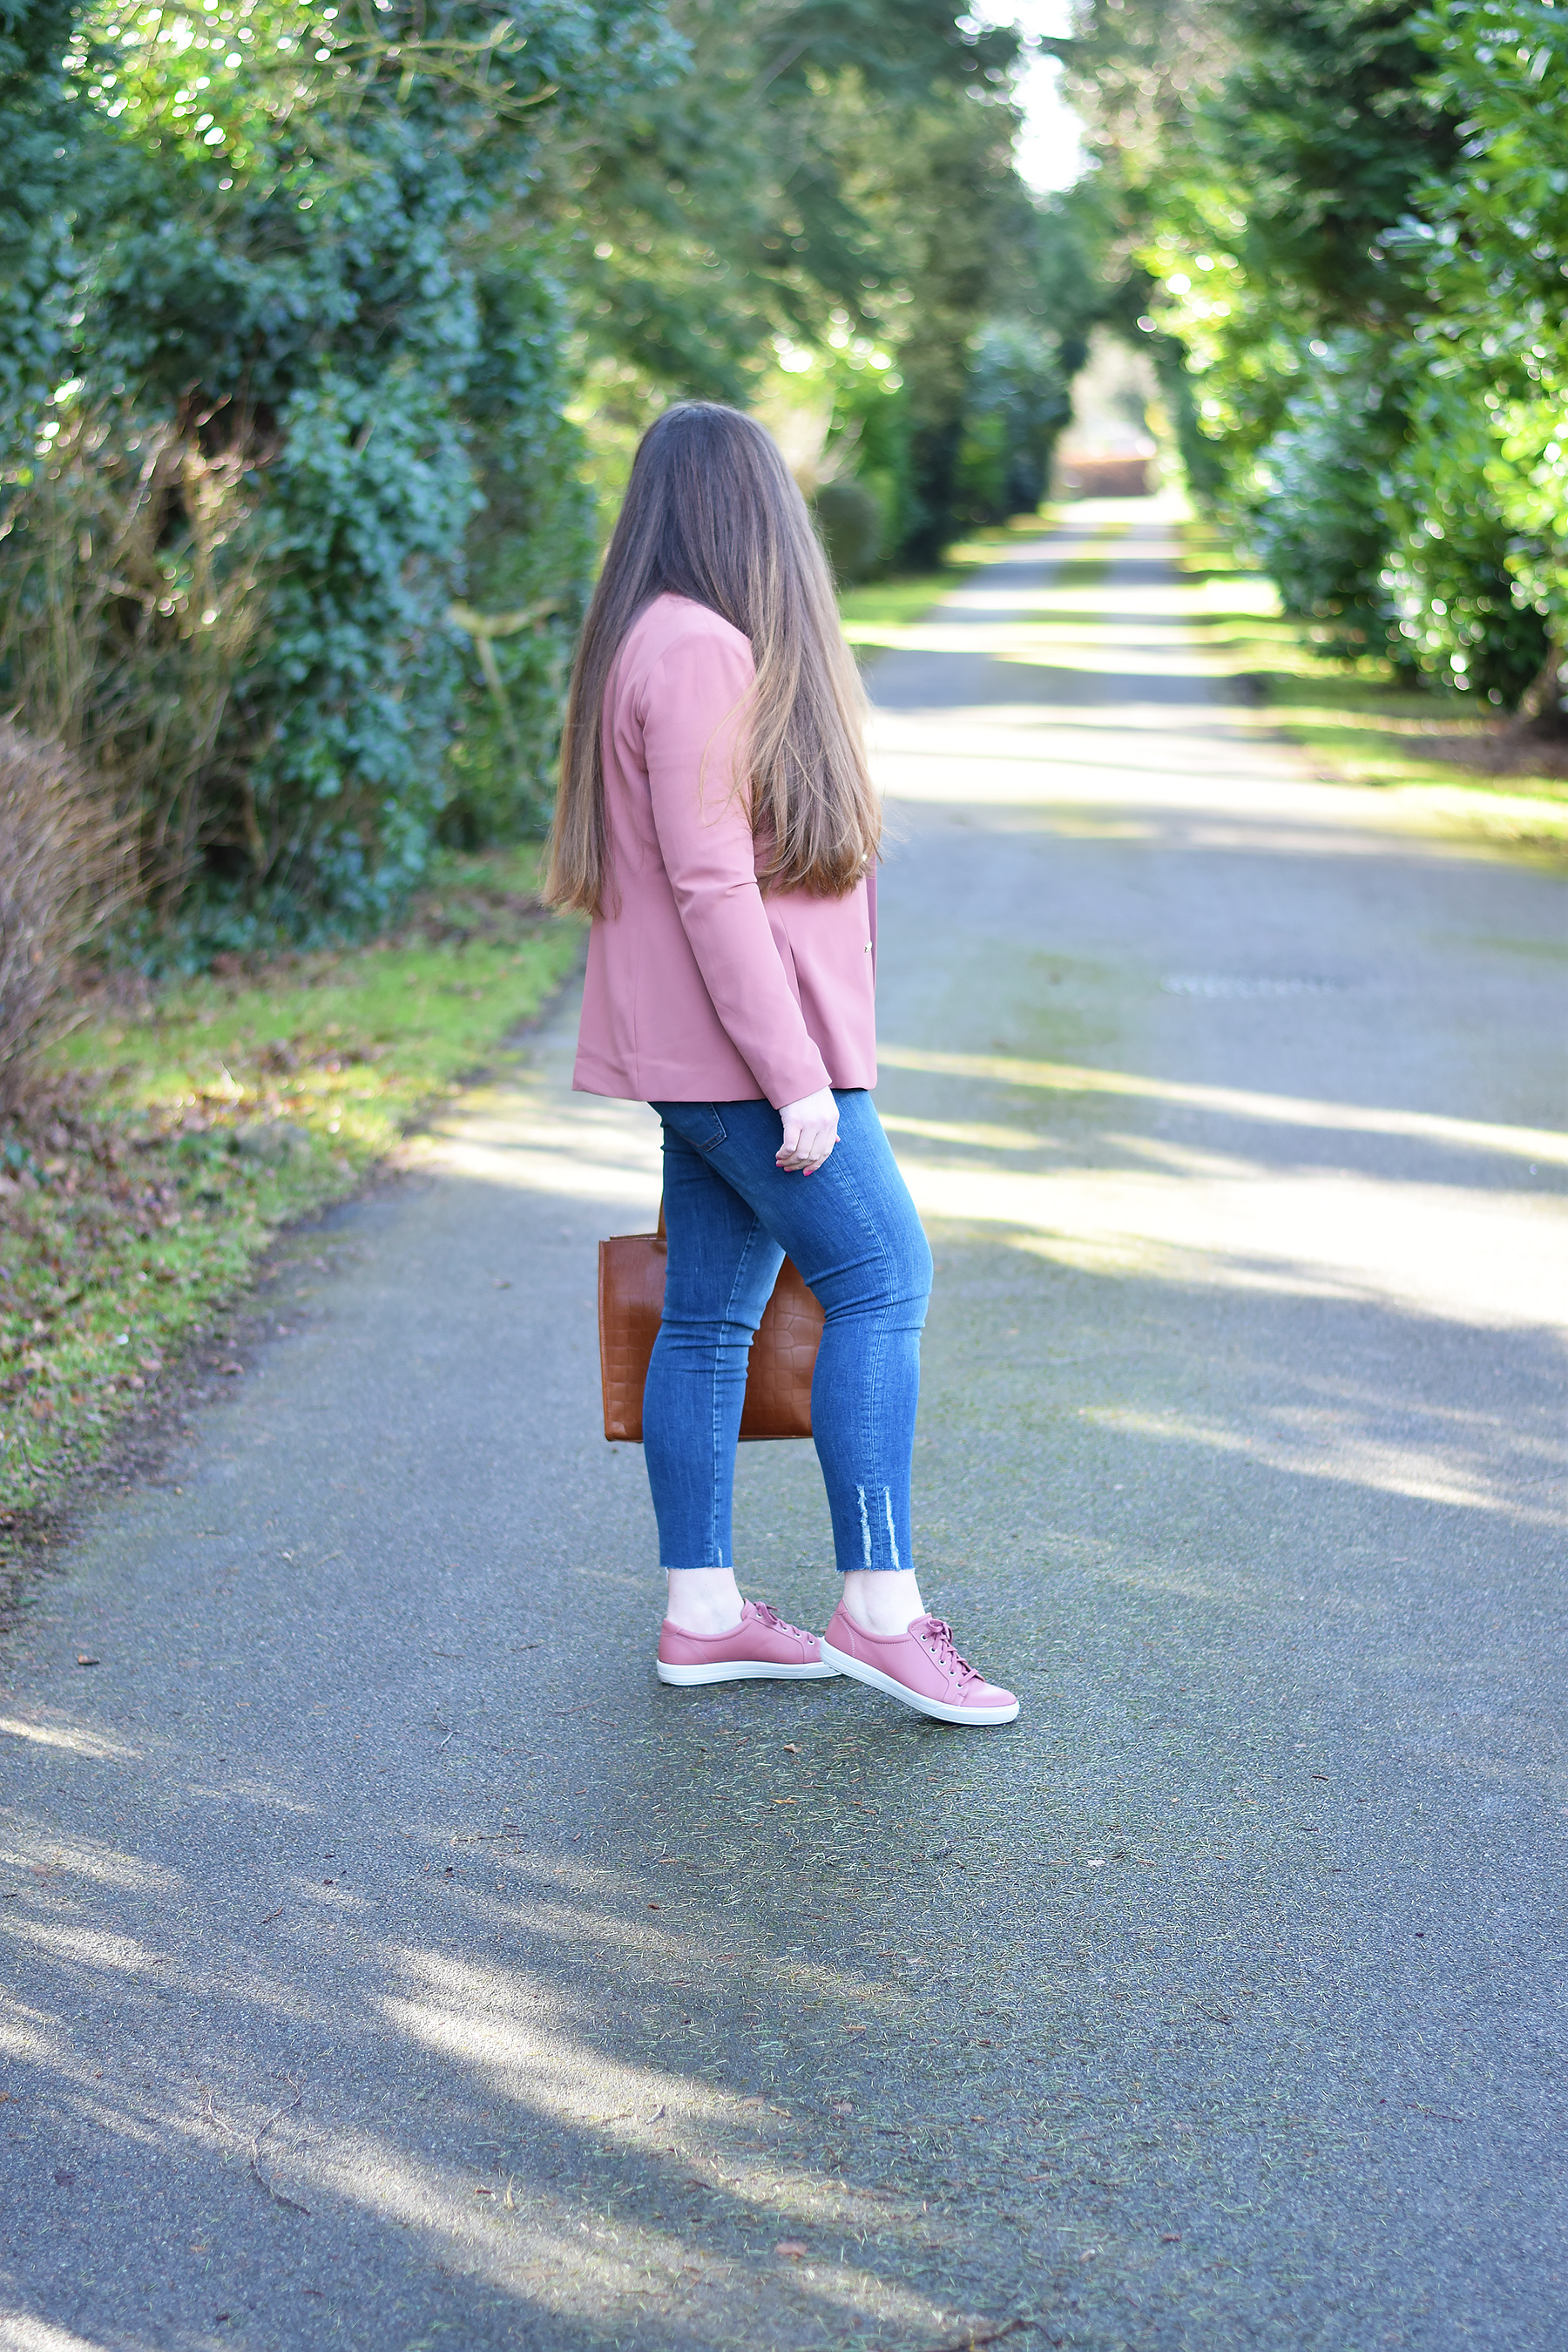 Salmon Pink Trainers Outfit with Zara distressed hem jeans